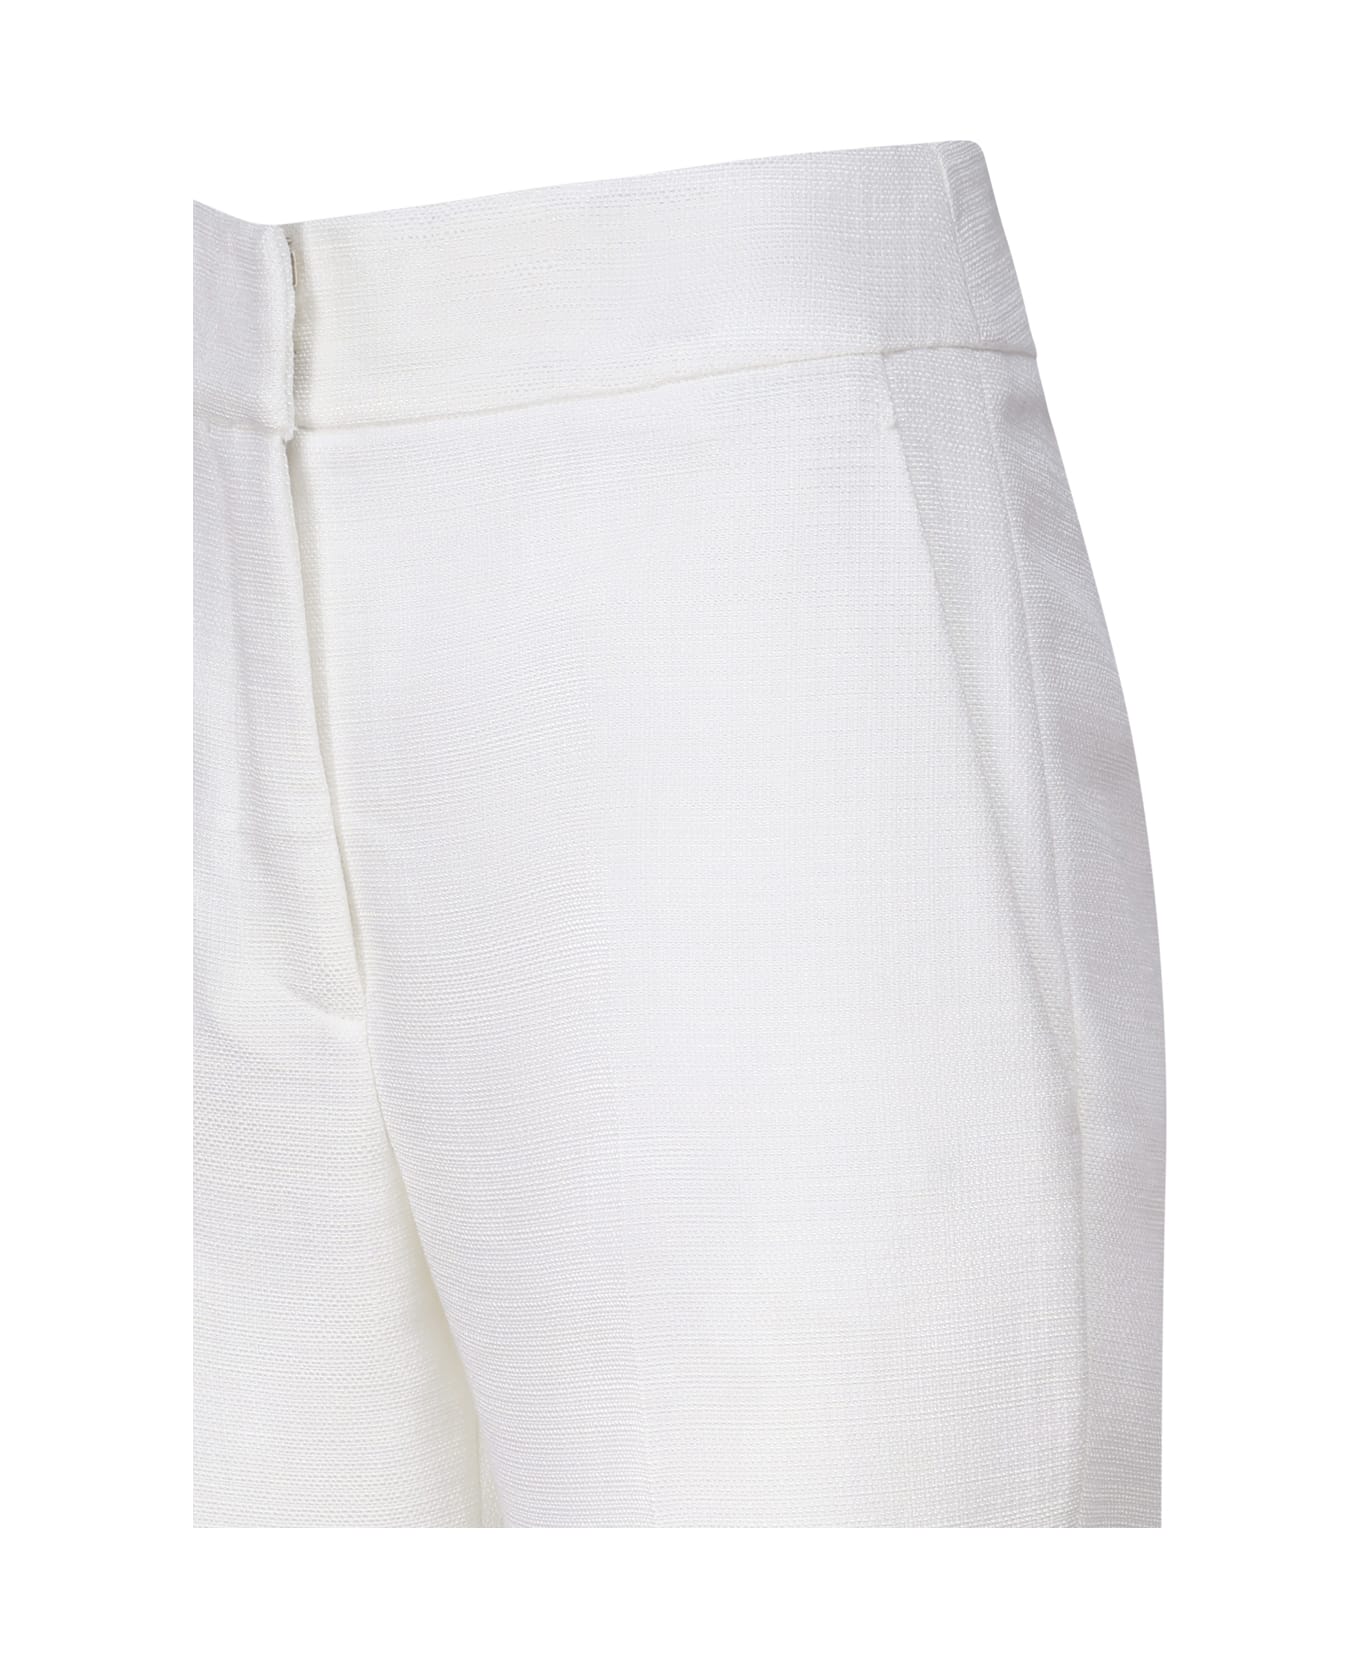 Genny Viscose Tailored Pants - White ボトムス